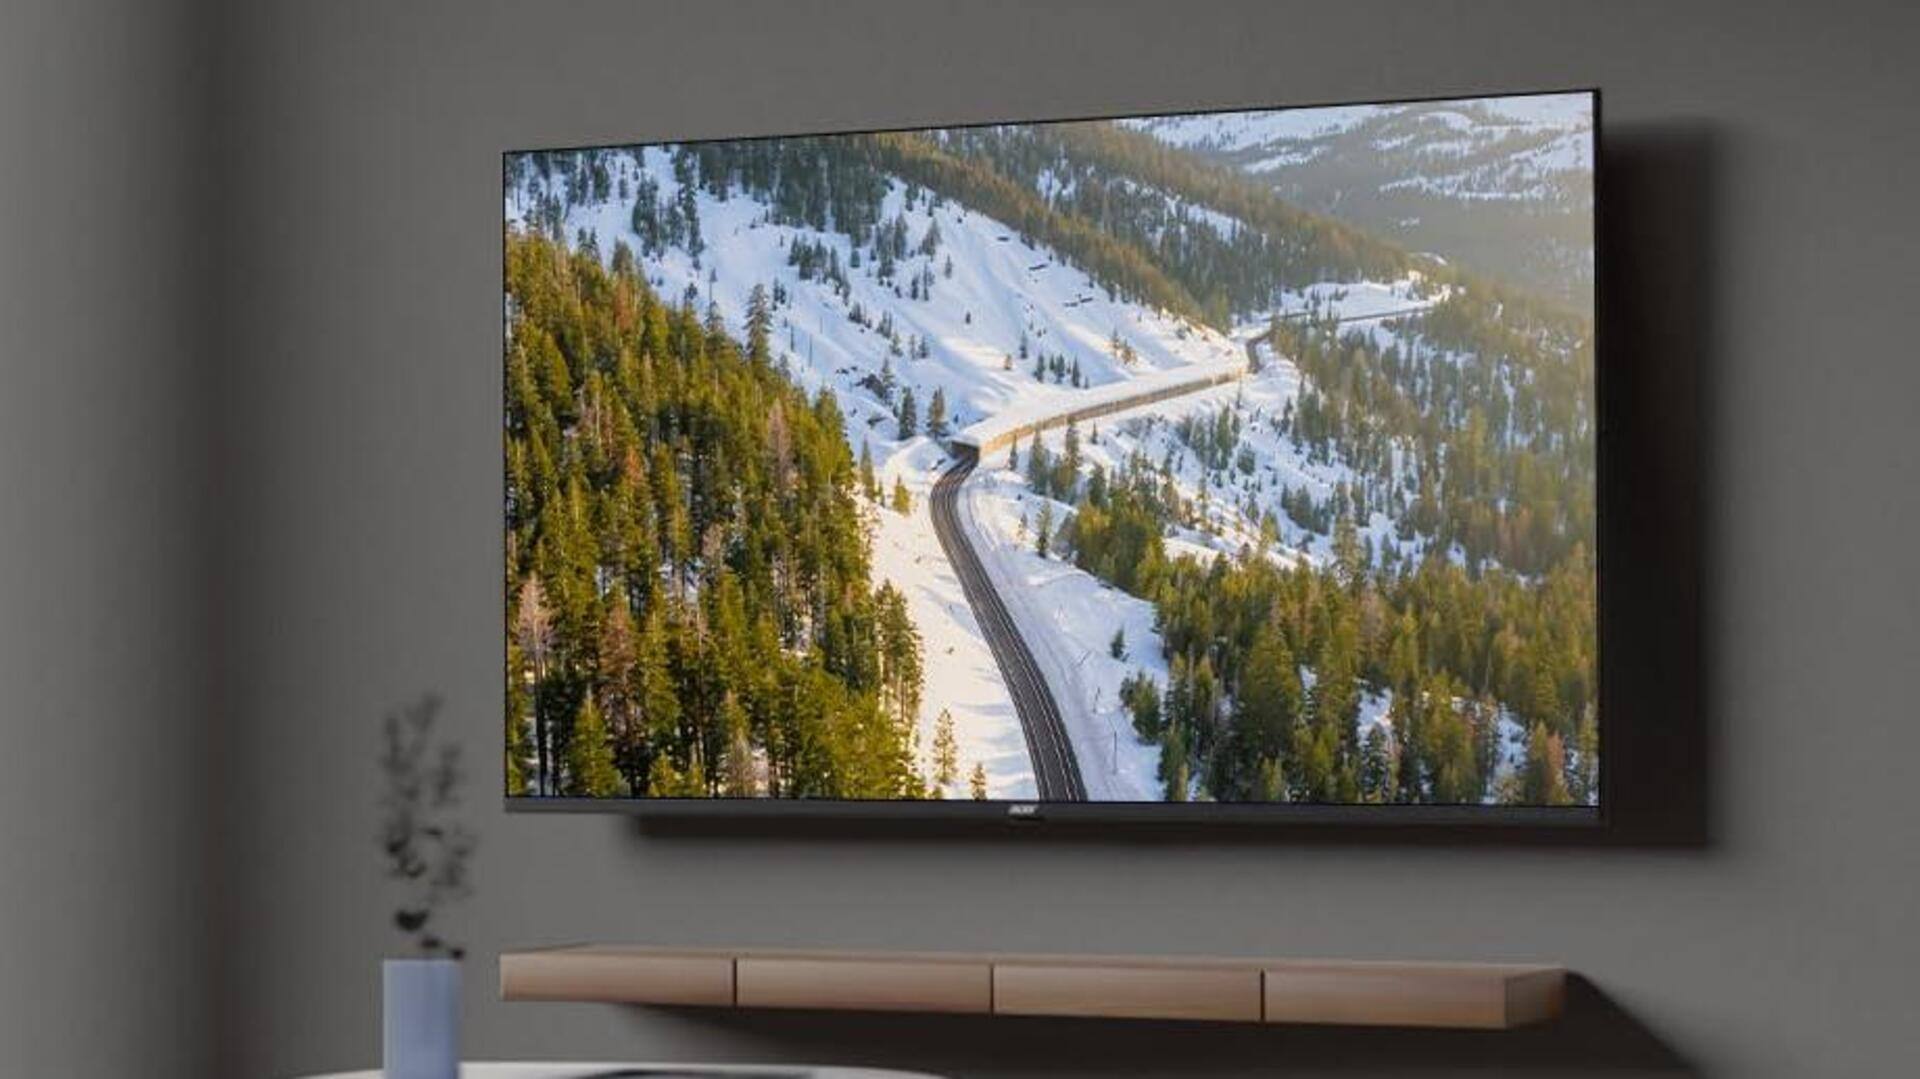 Amazon Prime Day: Acer's 75-inch 4K TV is 50% off